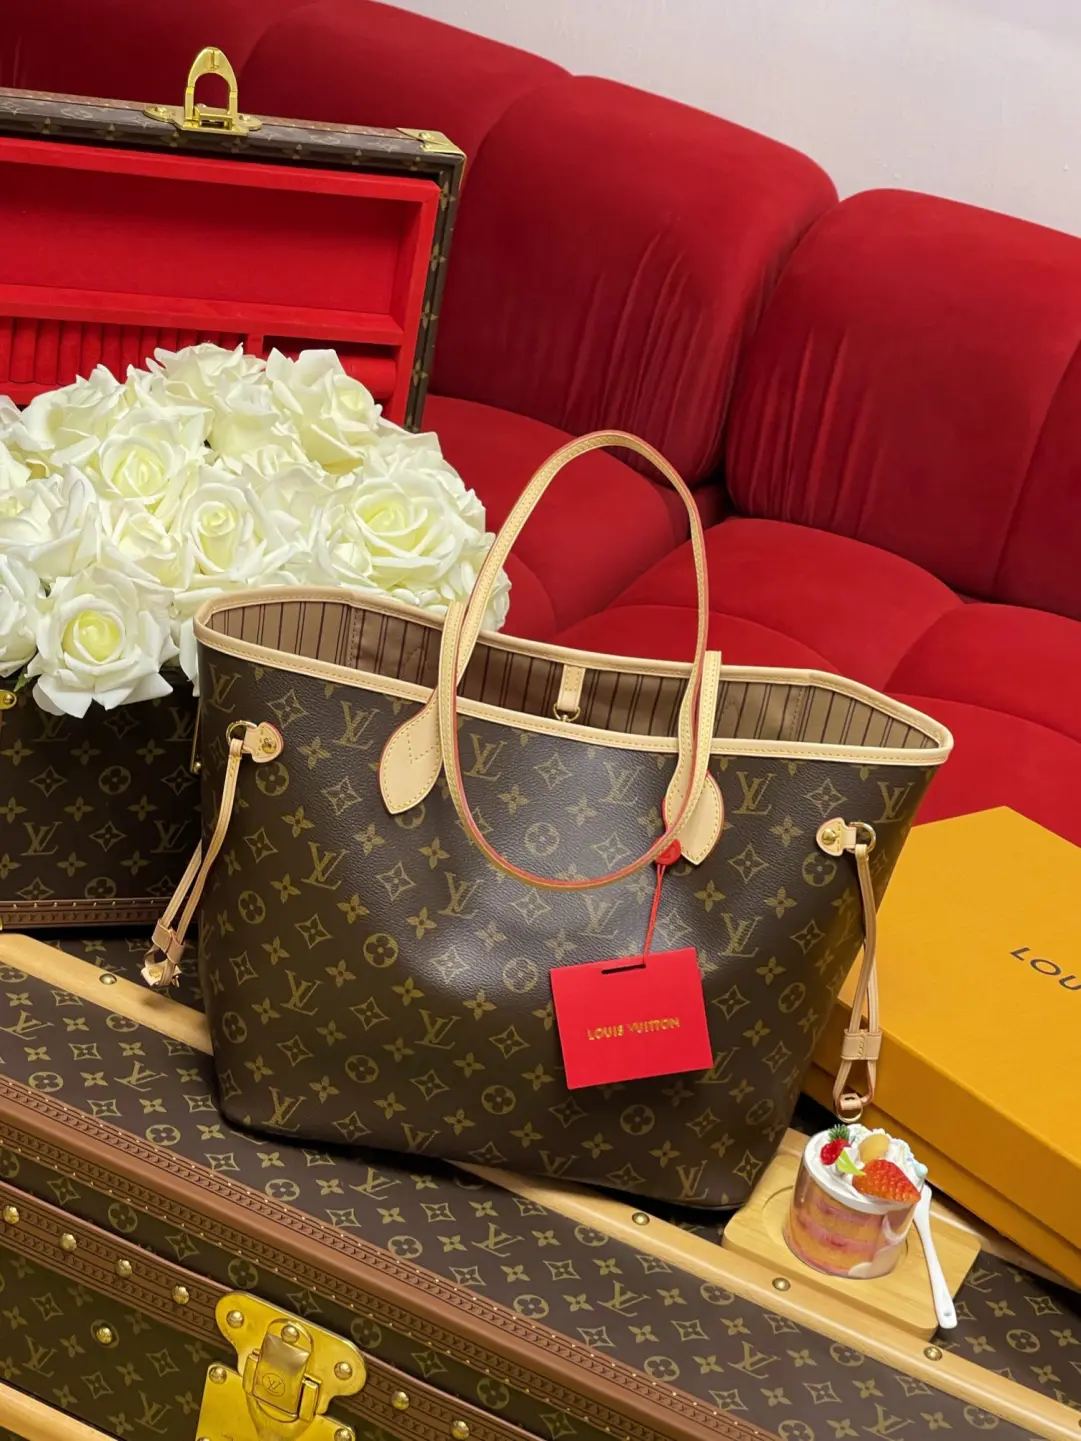 I PURCHASED A DESIGNER REPLICA  LOUIS VUITTON NEVERFULL MM REPLICA REVIEW  